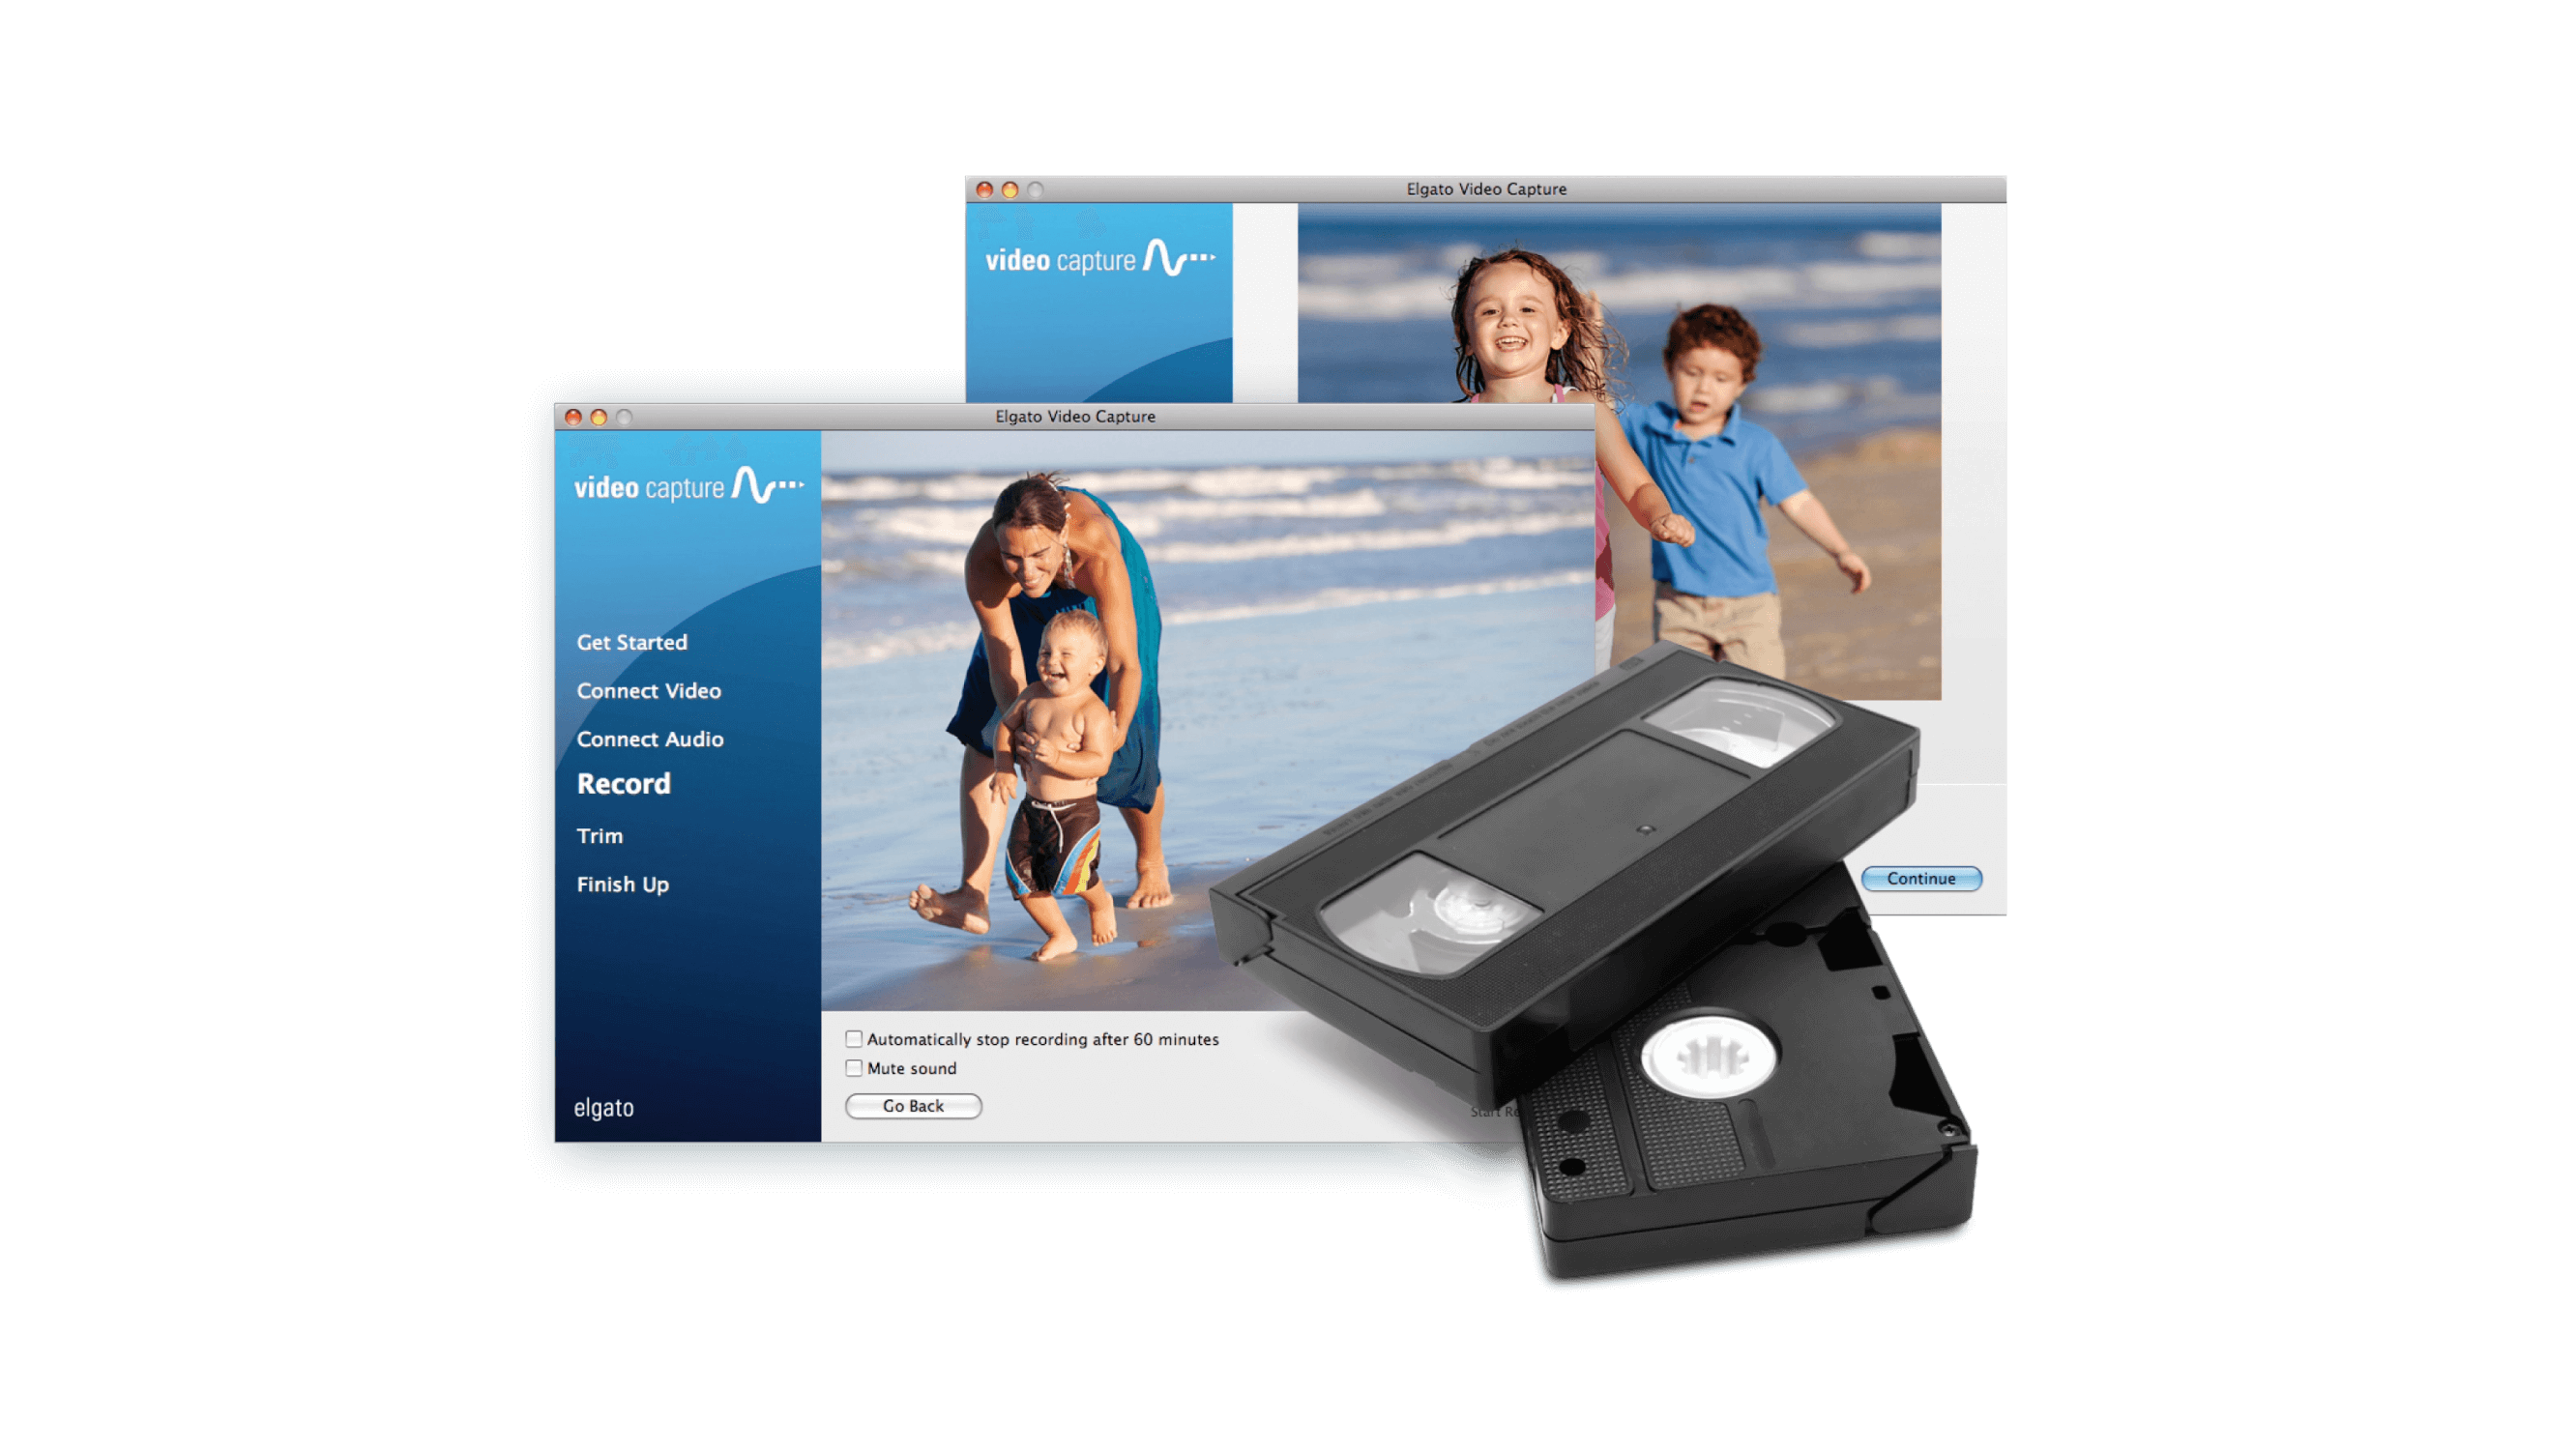 Elgato Video Capture Devices for sale in Parkersburg, Indiana